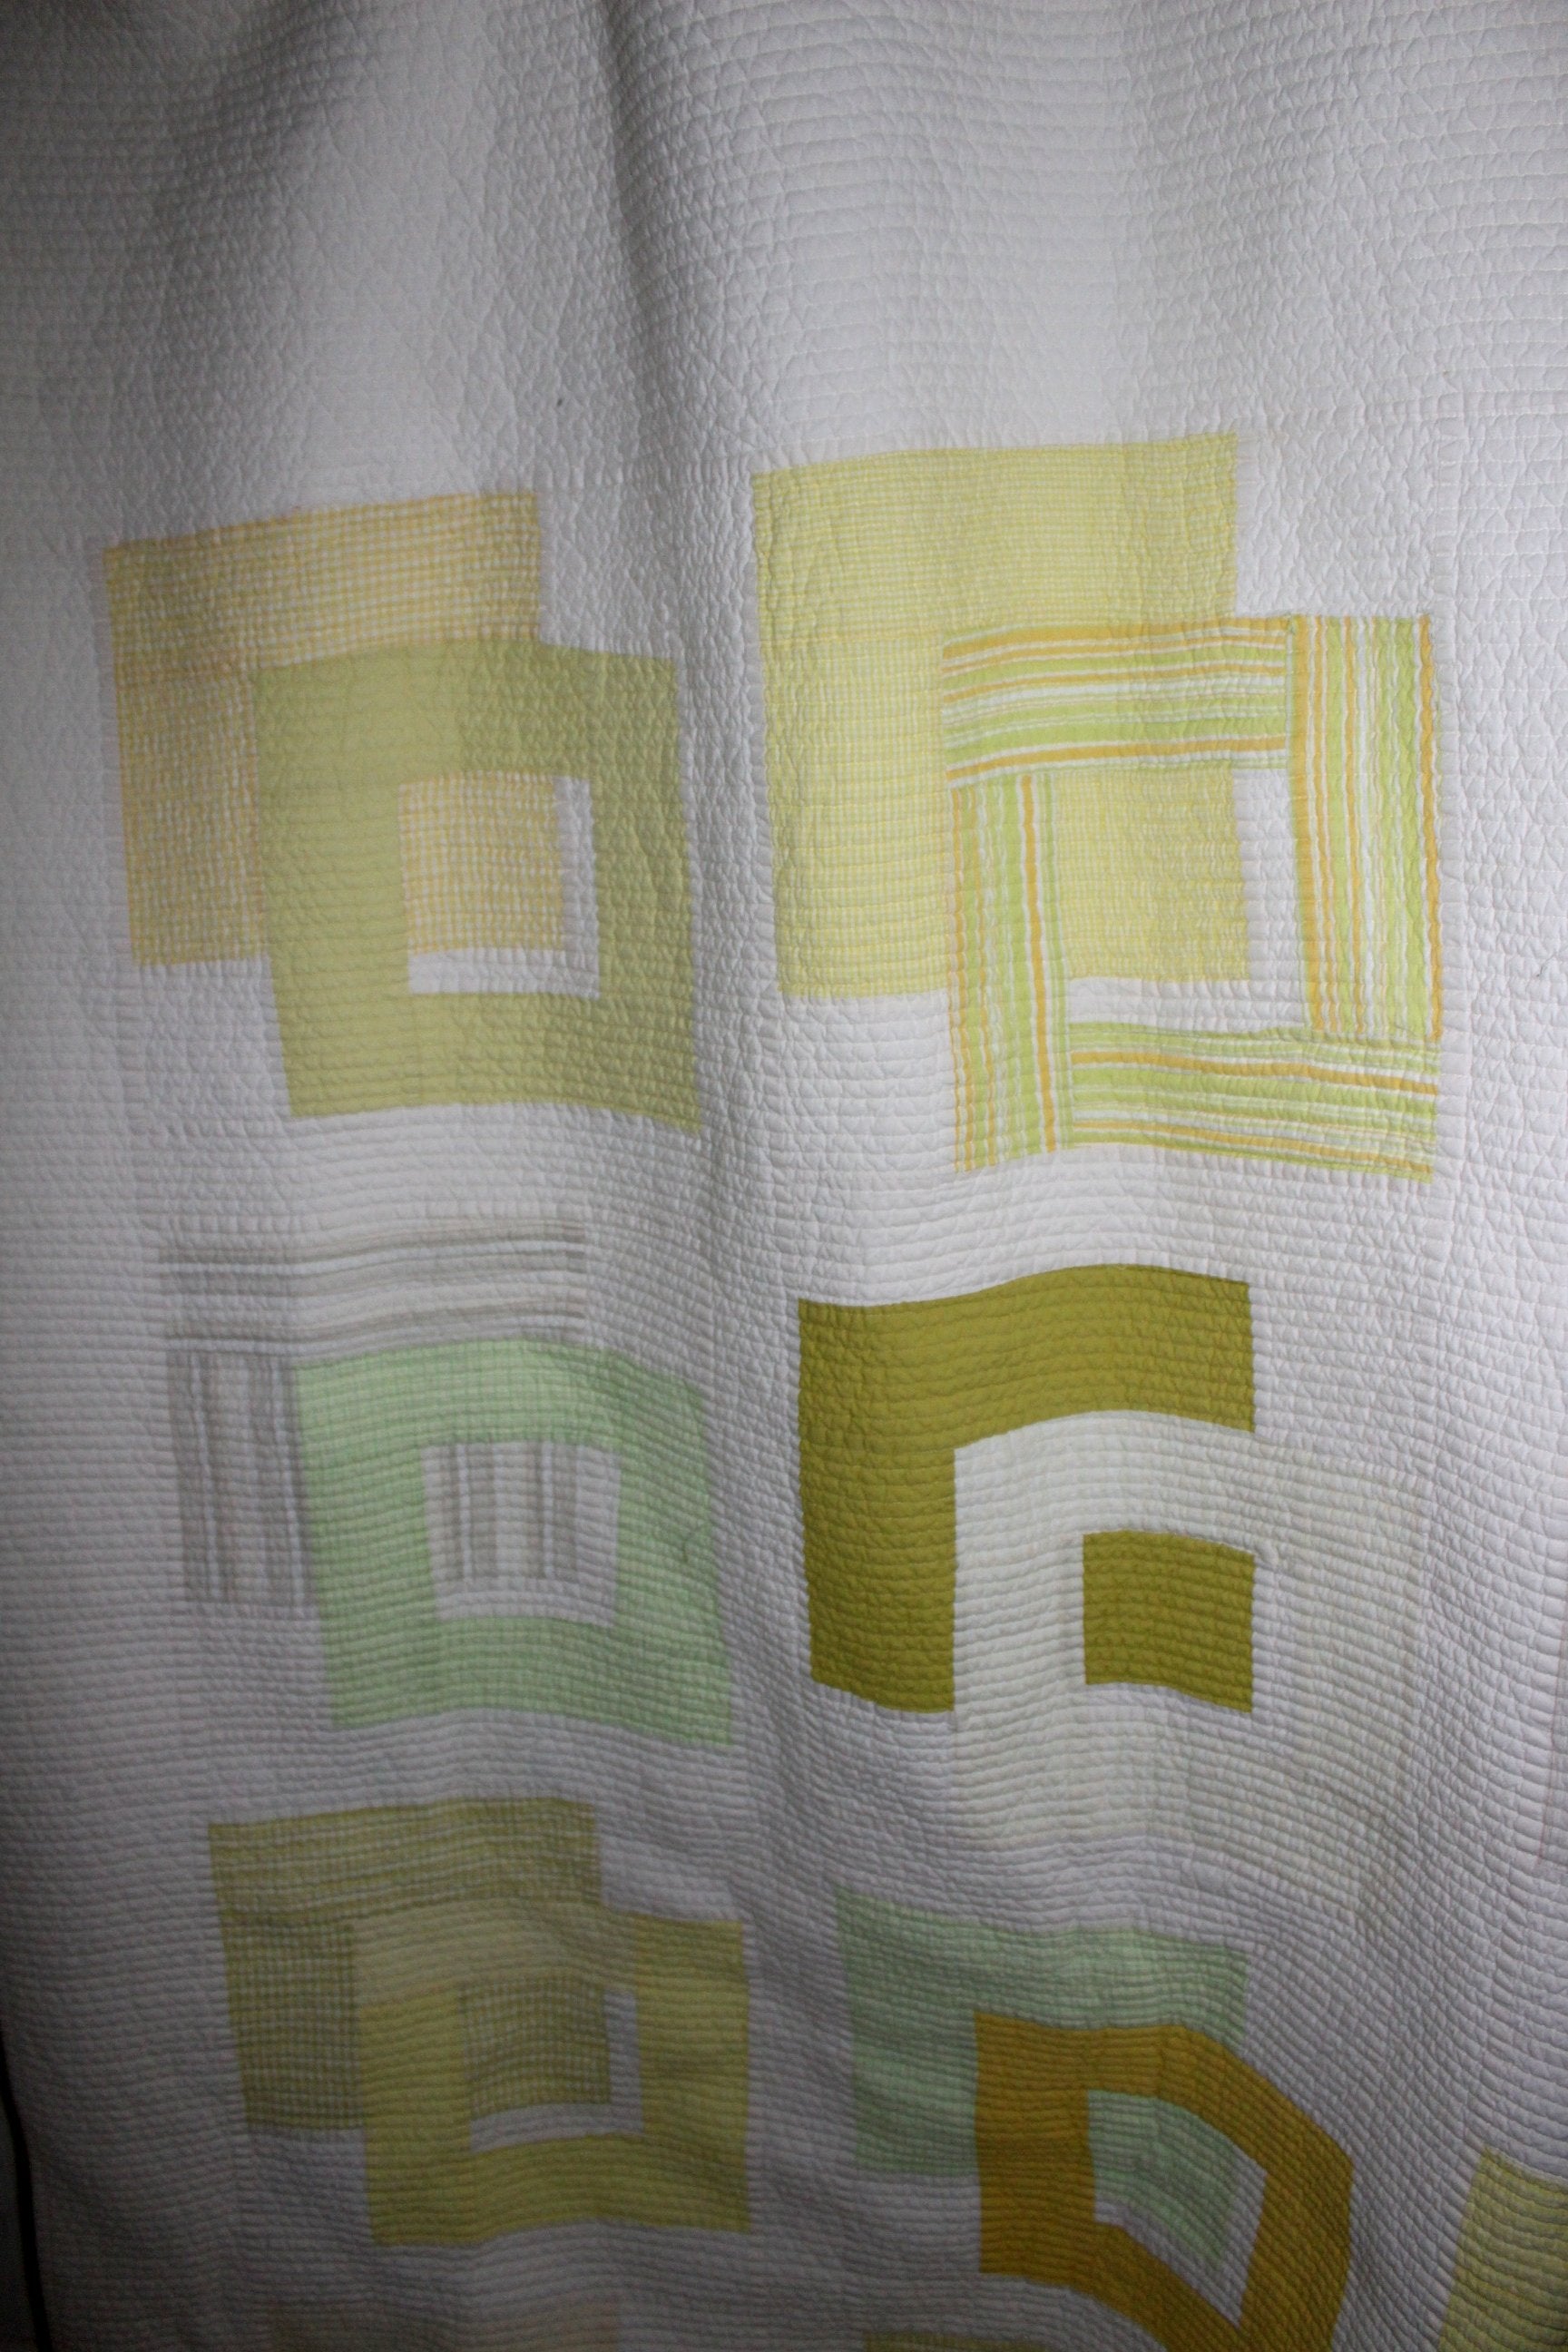 Crate Barrel Quilt King 104" X 94" Edgebrook All Cotton Geometric Mod Yellows Greens White colorful